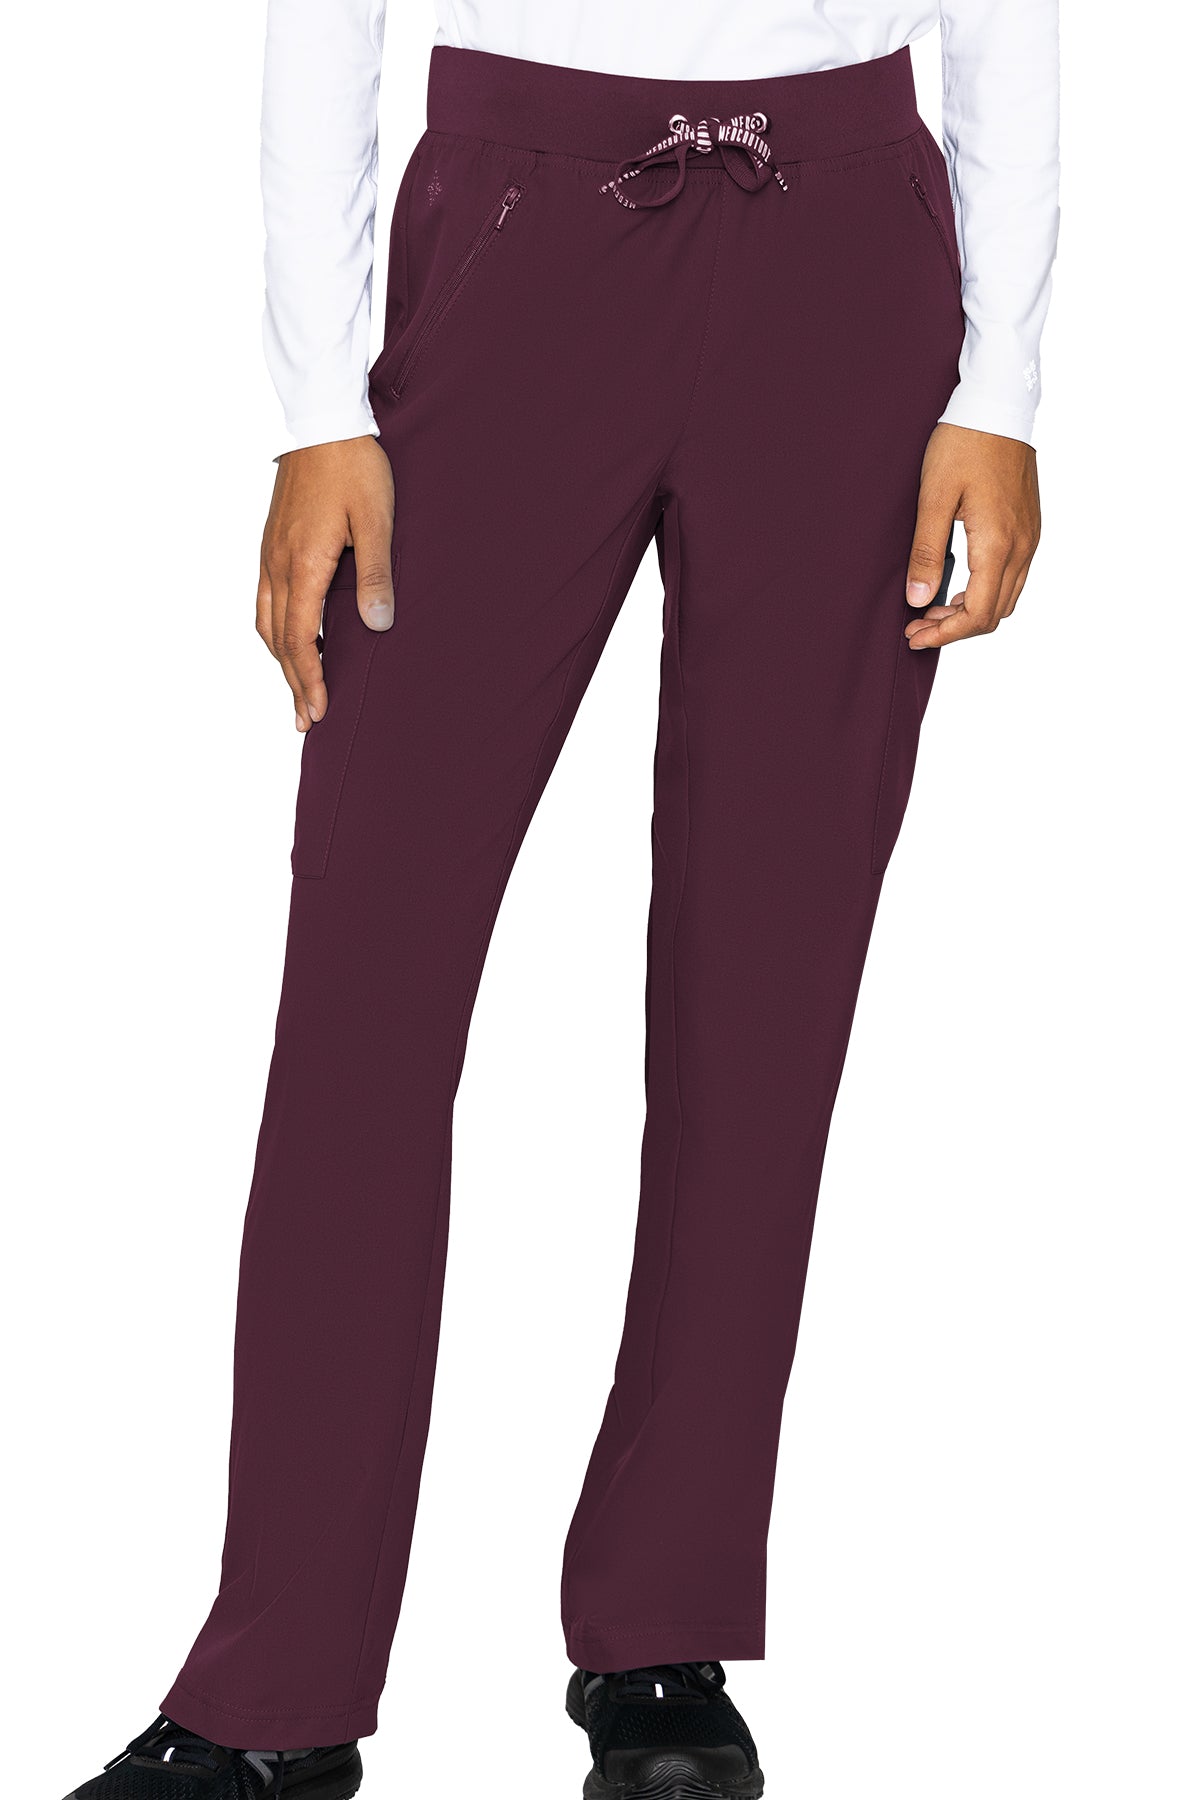 Med Couture Petite Scrub Pants Insight Zipper Pocket Pant in Wine at Parker's Clothing and Shoes